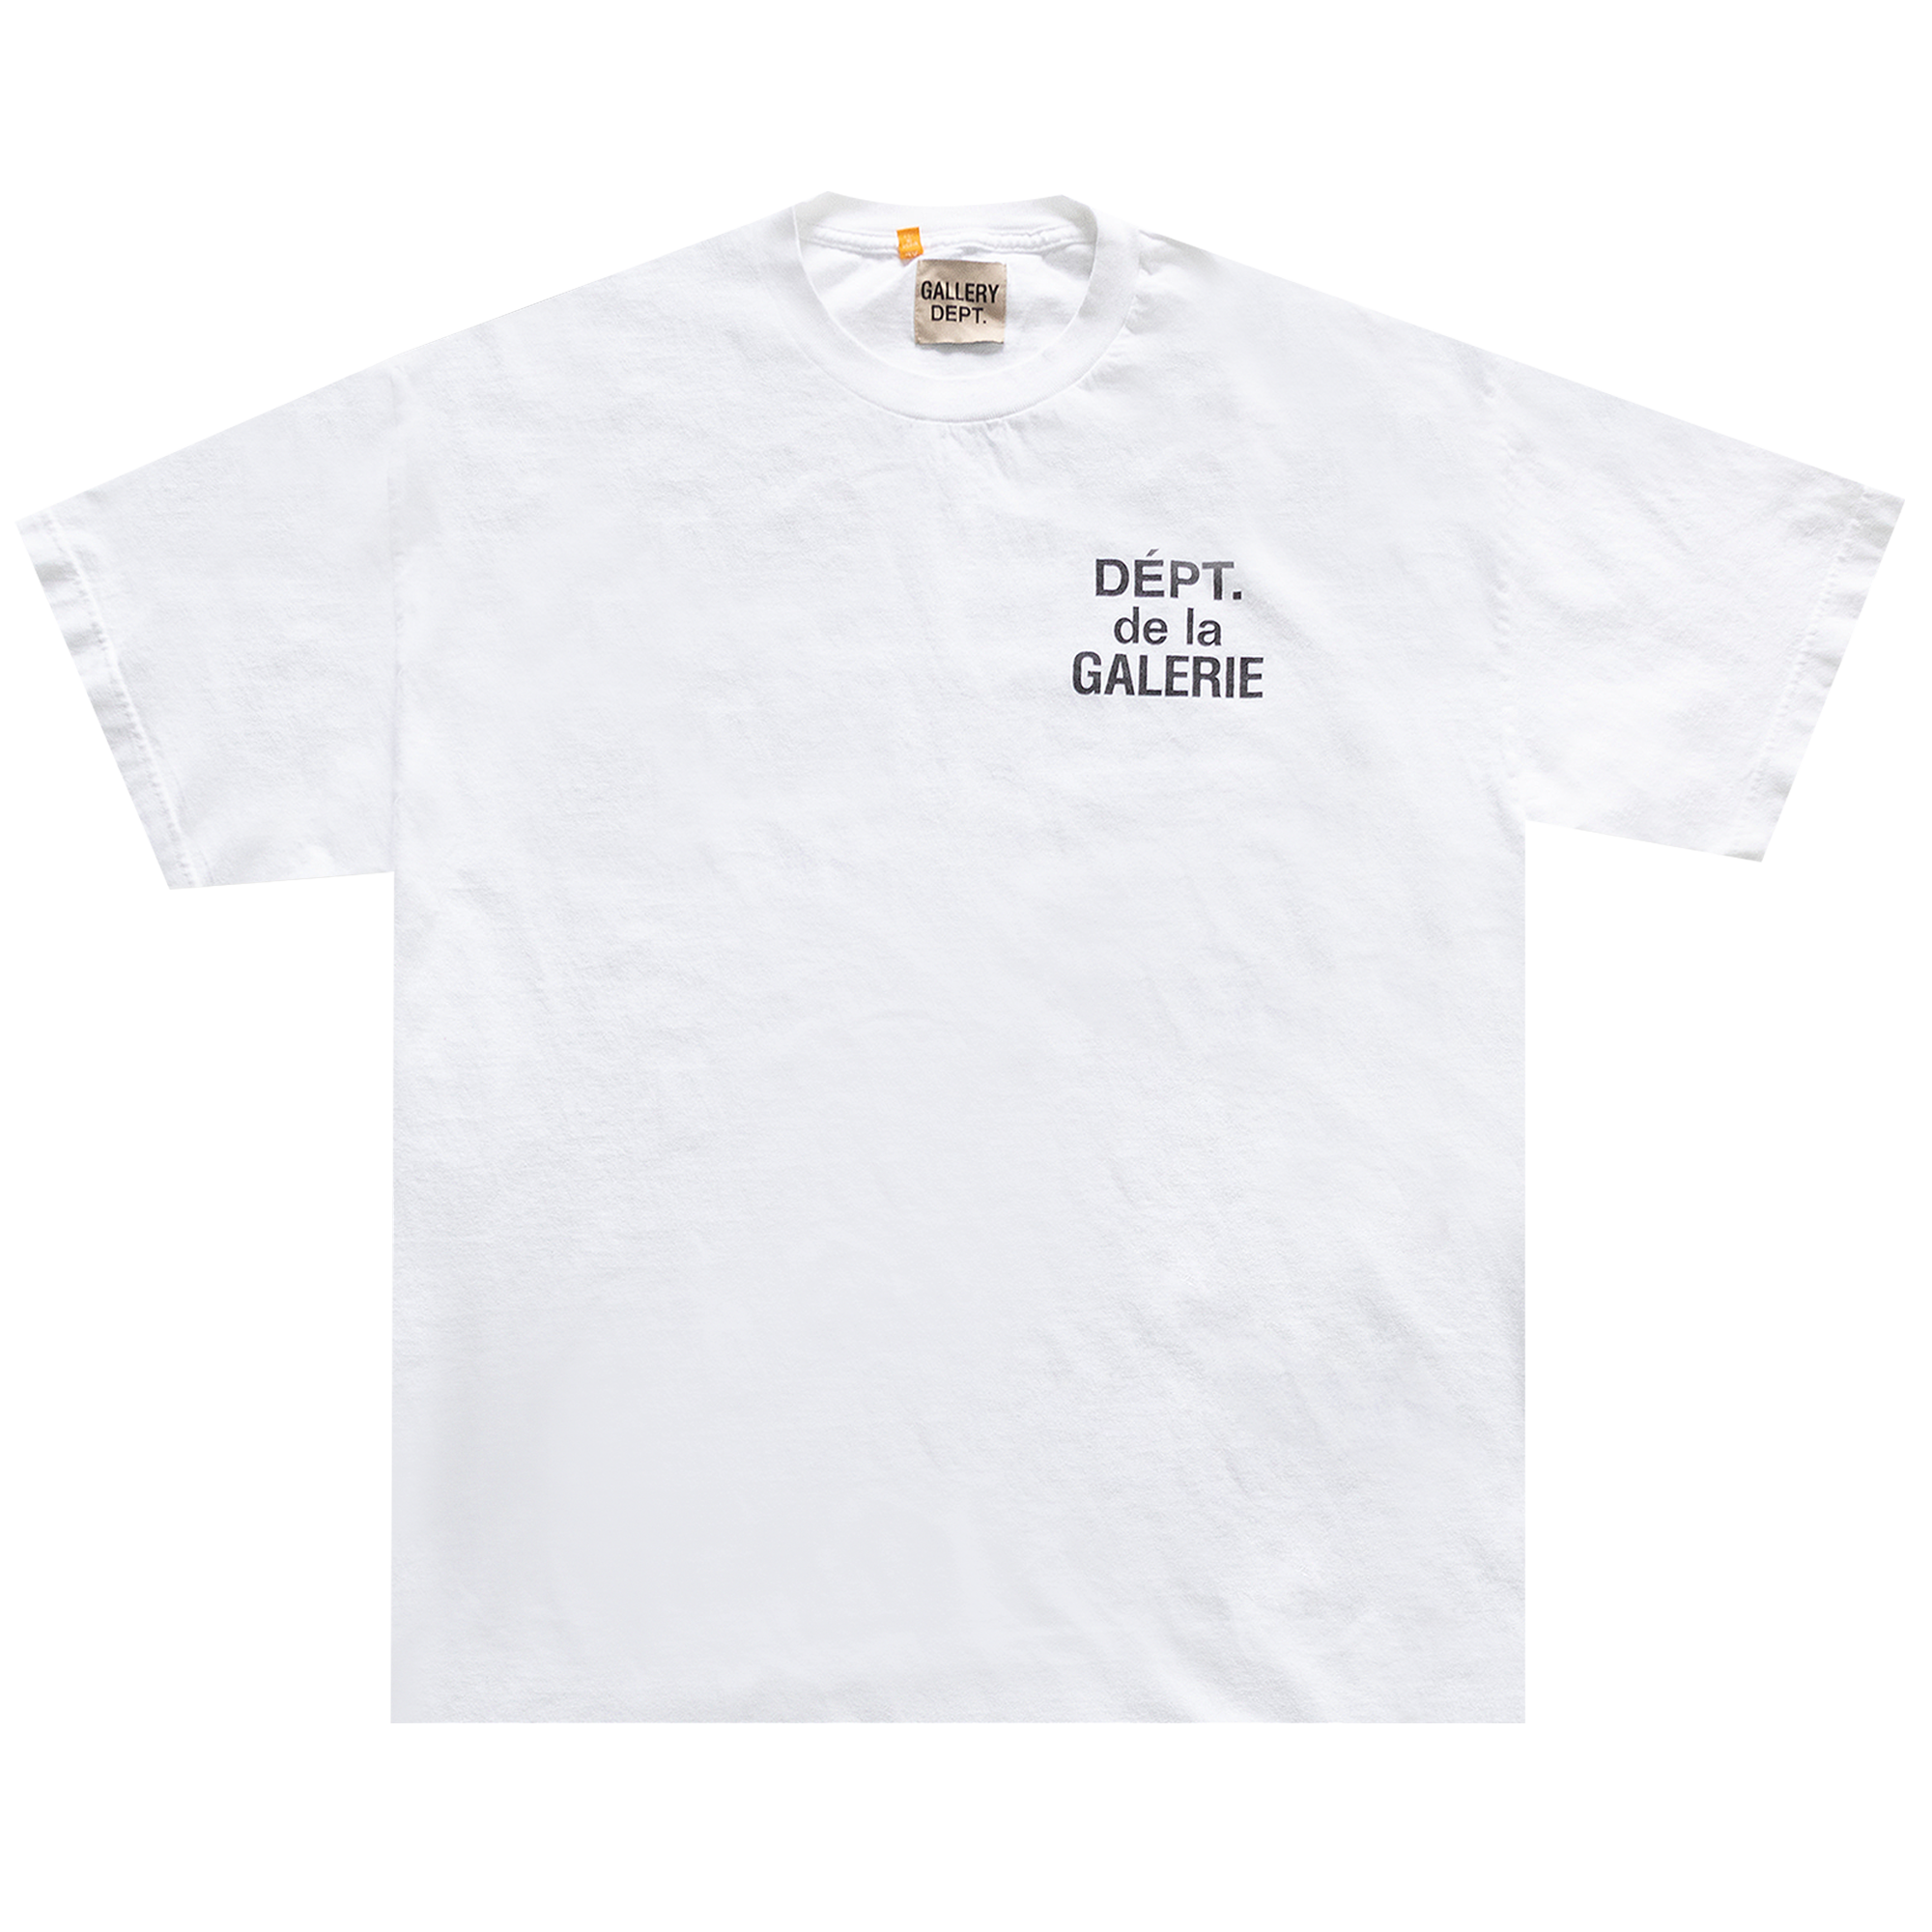 Pre-owned Gallery Dept. French Tee 'white'